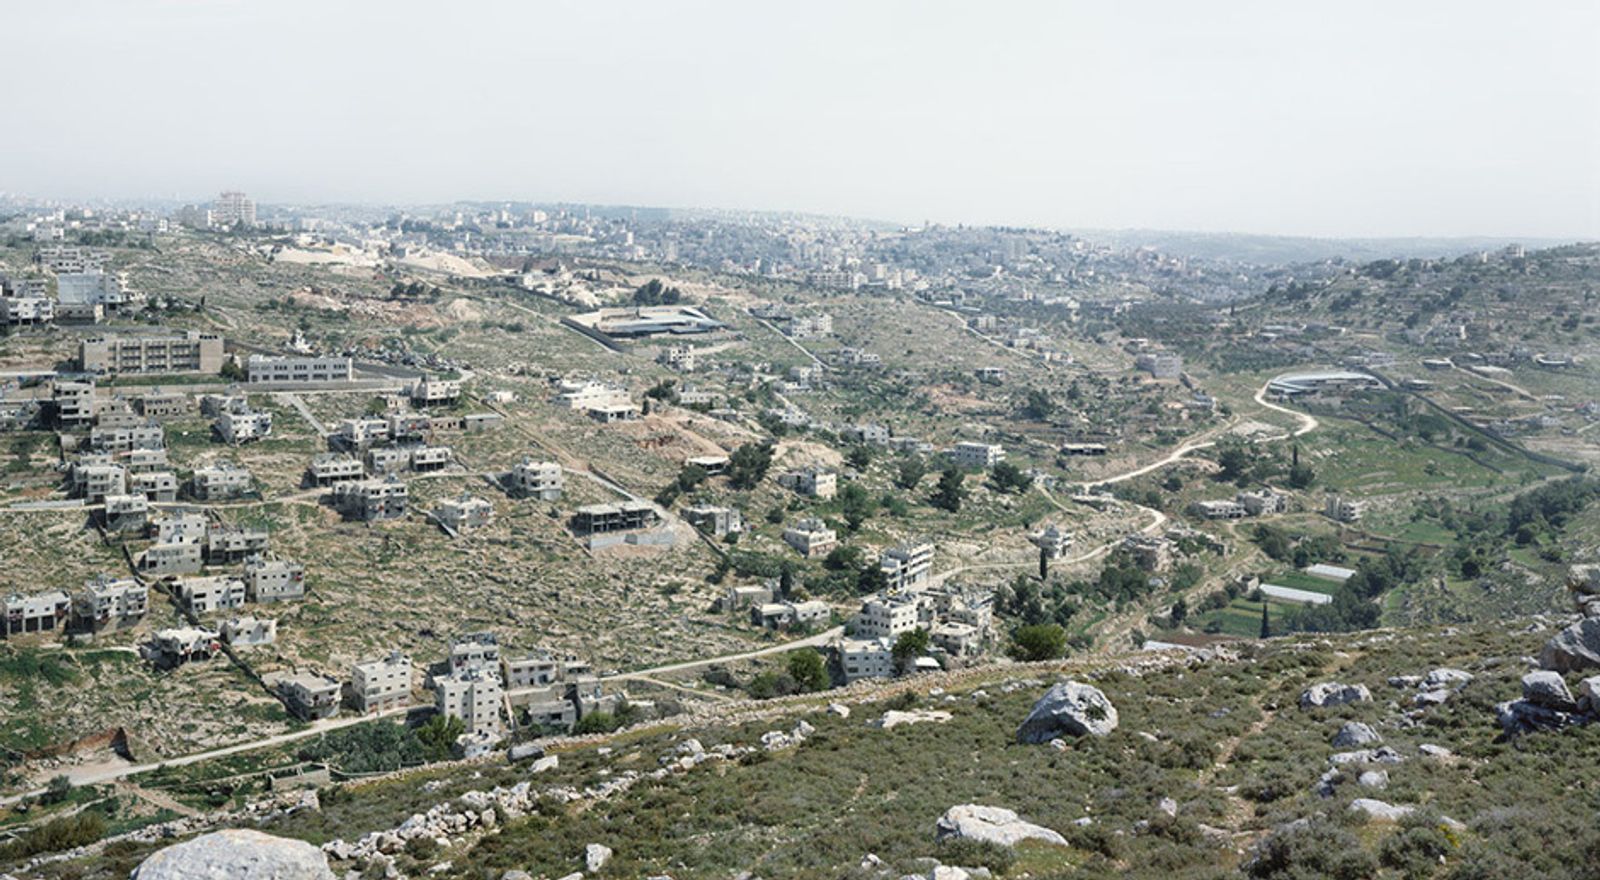 © Yaakov Israel - From the series 'The Legitimacy of Landscape', 2002-2015